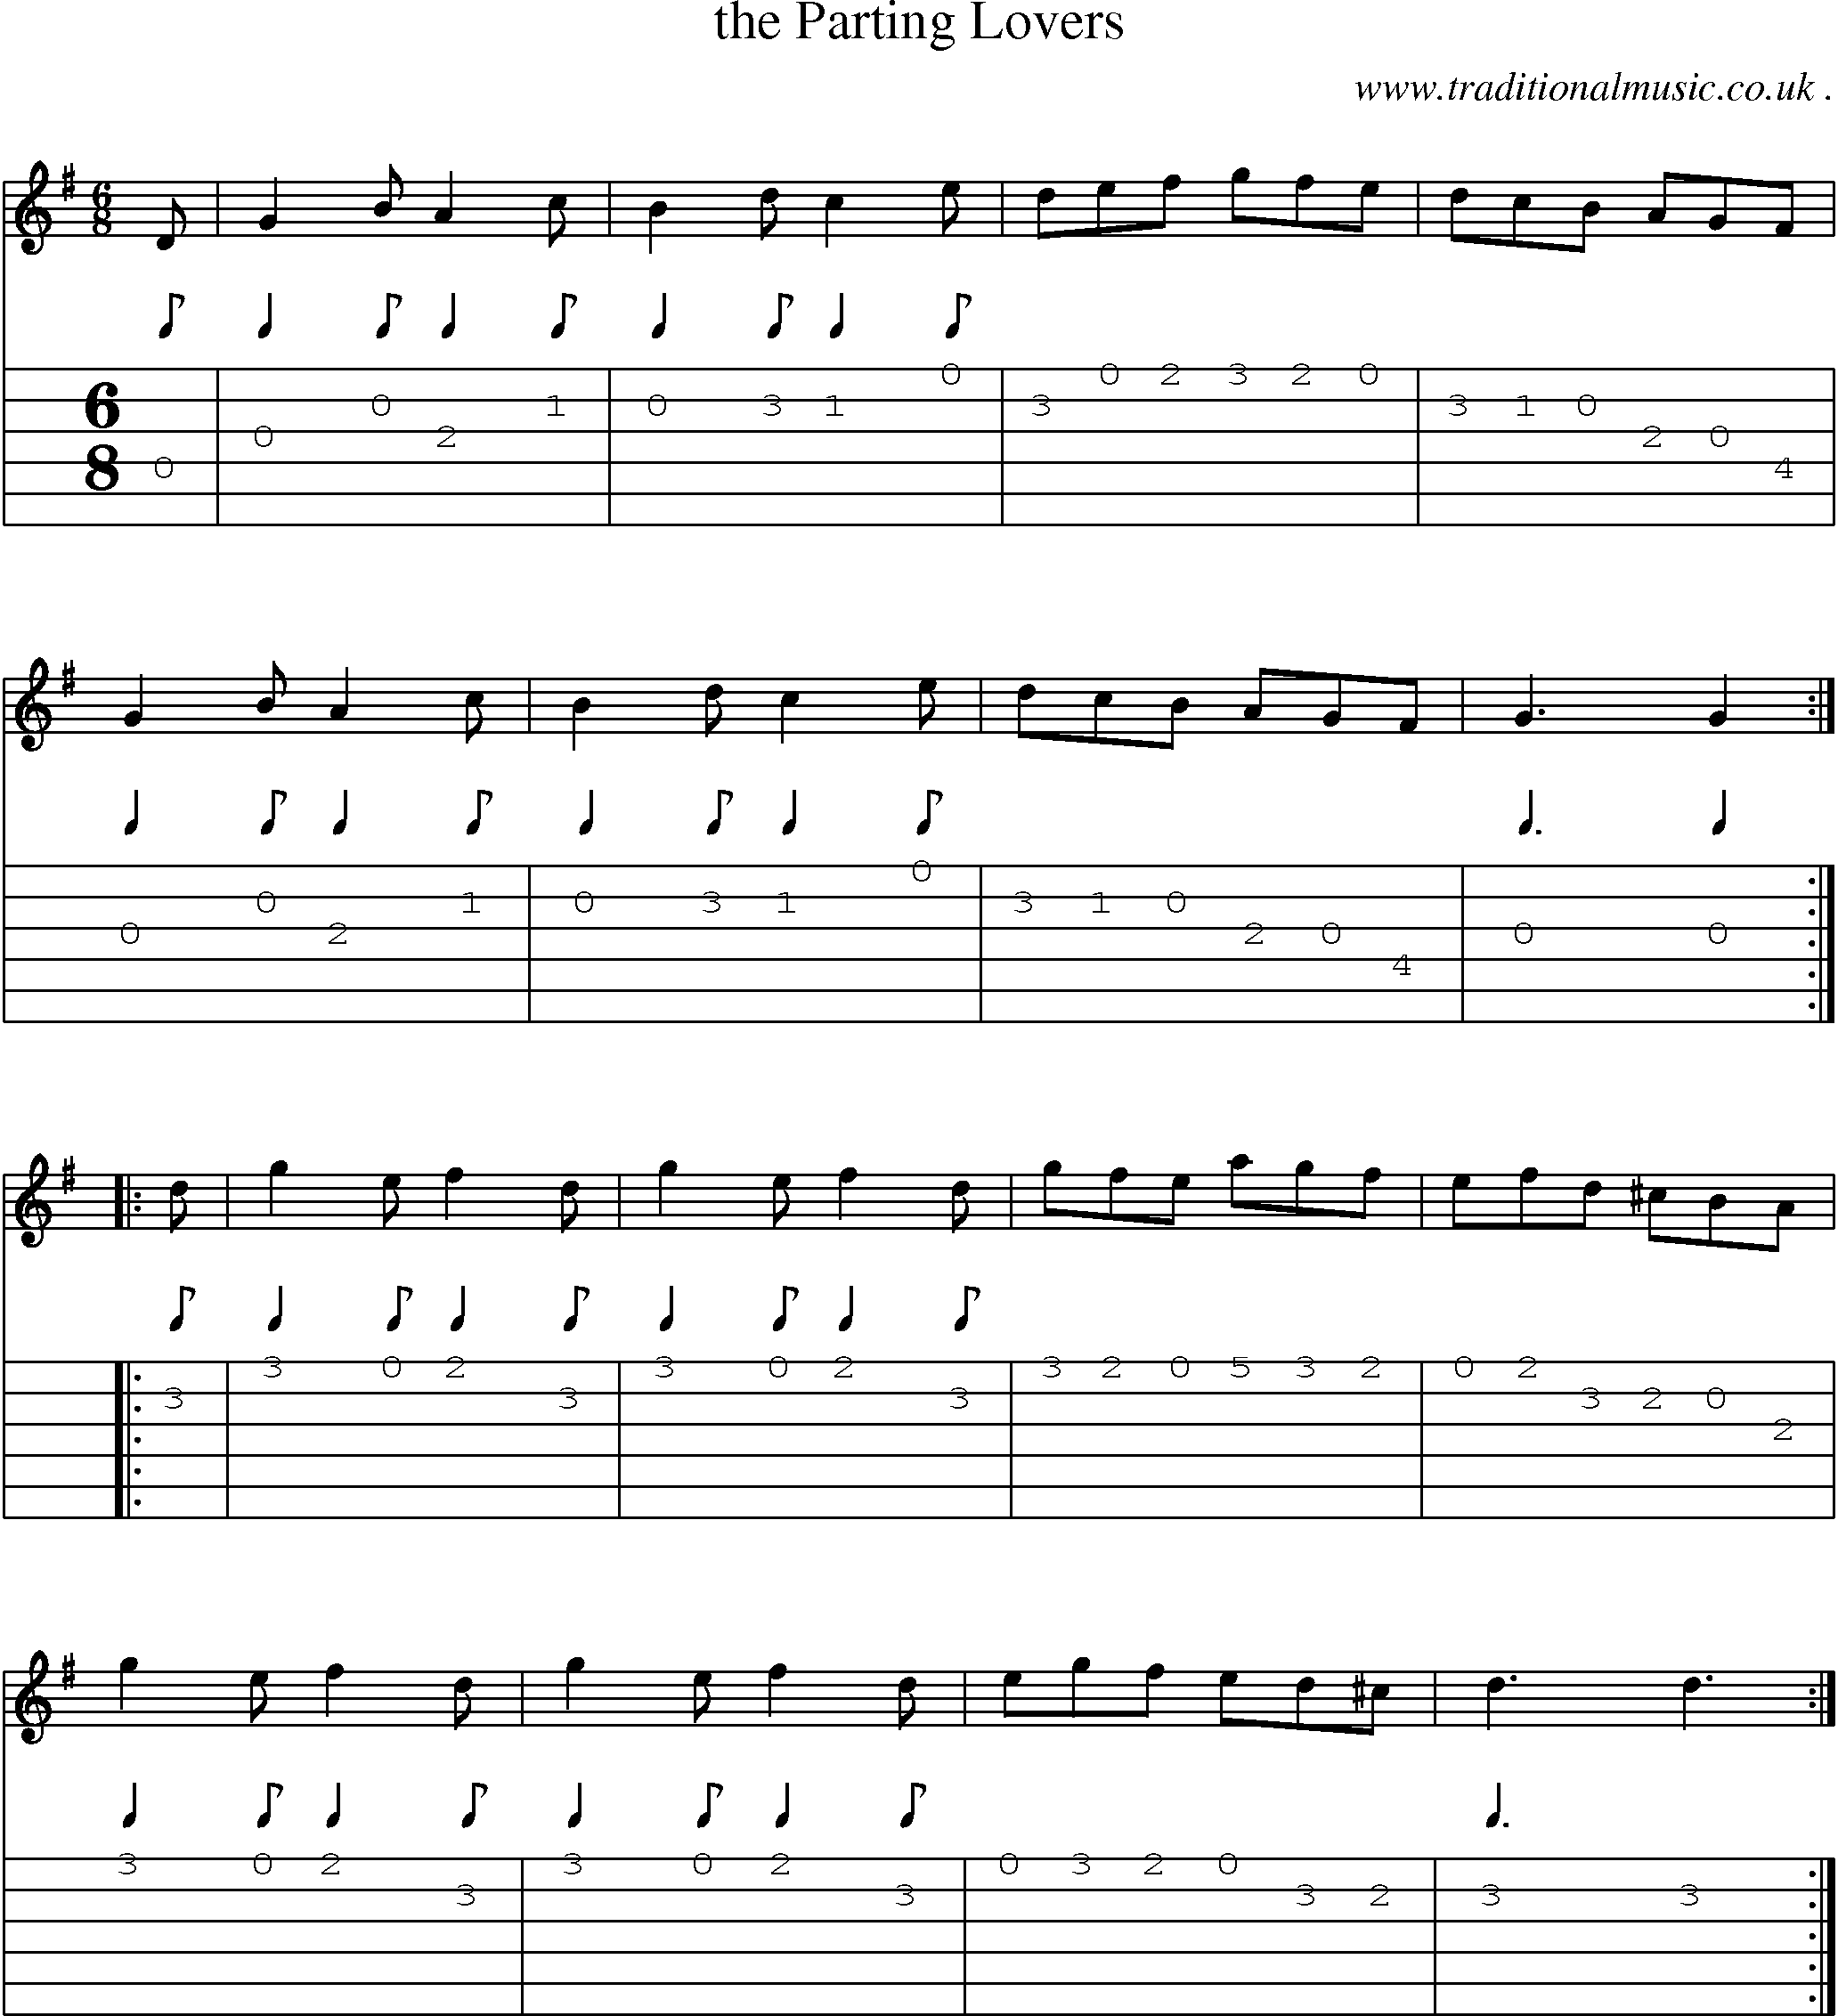 Sheet-Music and Guitar Tabs for The Parting Lovers